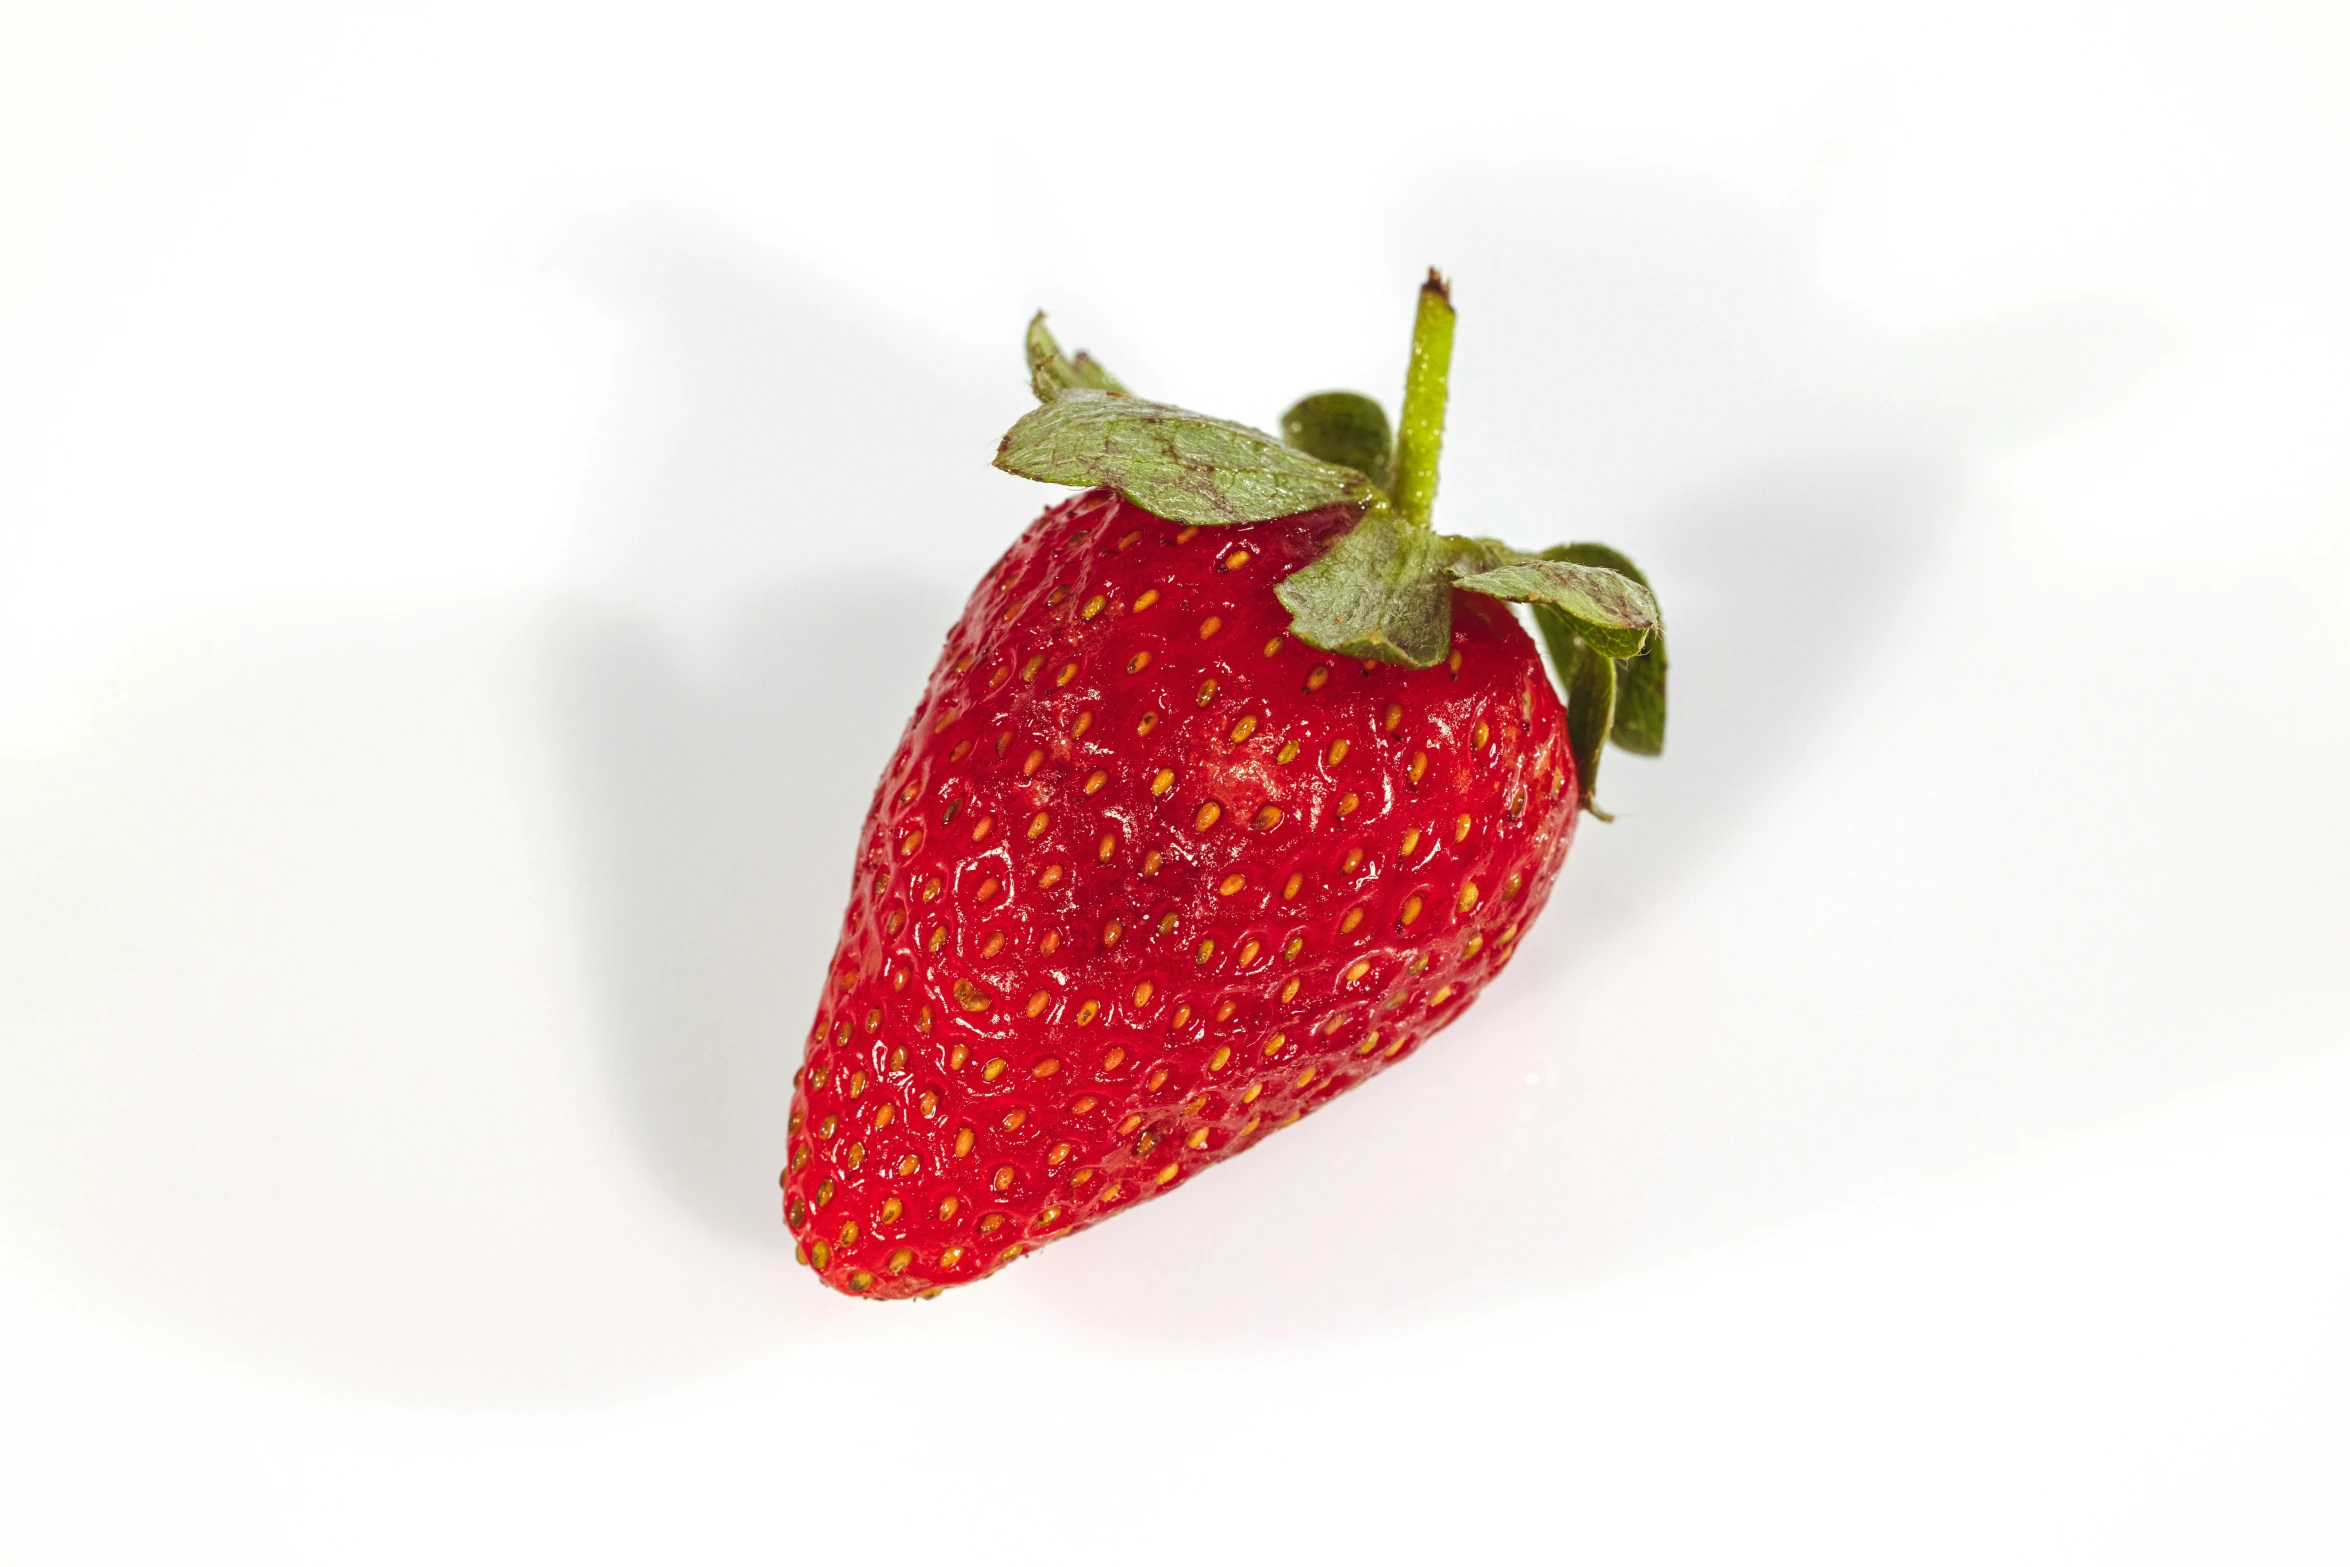 the small strawberry is in the white background